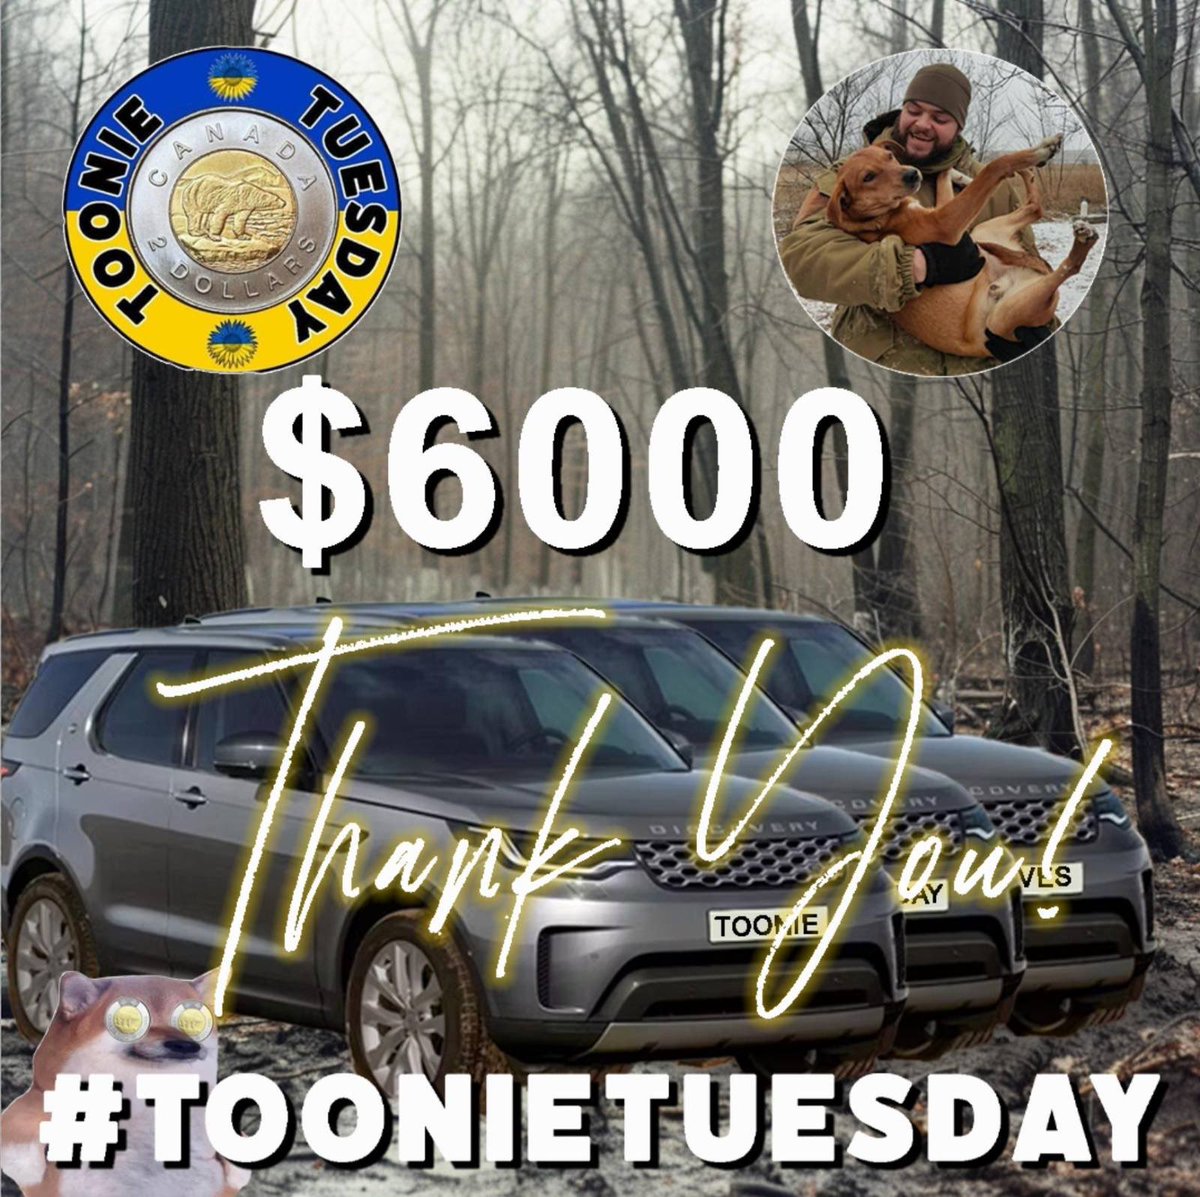 The results from yesterdays #ToonieTuesday are in…

🥁🥁🥁

$6000 raised for @cossackgundi in the International Legion & enough for 2 of 3 trucks needed 🛻🛻 

Thanks to all the fellas who donated & reposted! If you missed out it’s now Orthodox Toonie Tuesday!

Team Monty Coin